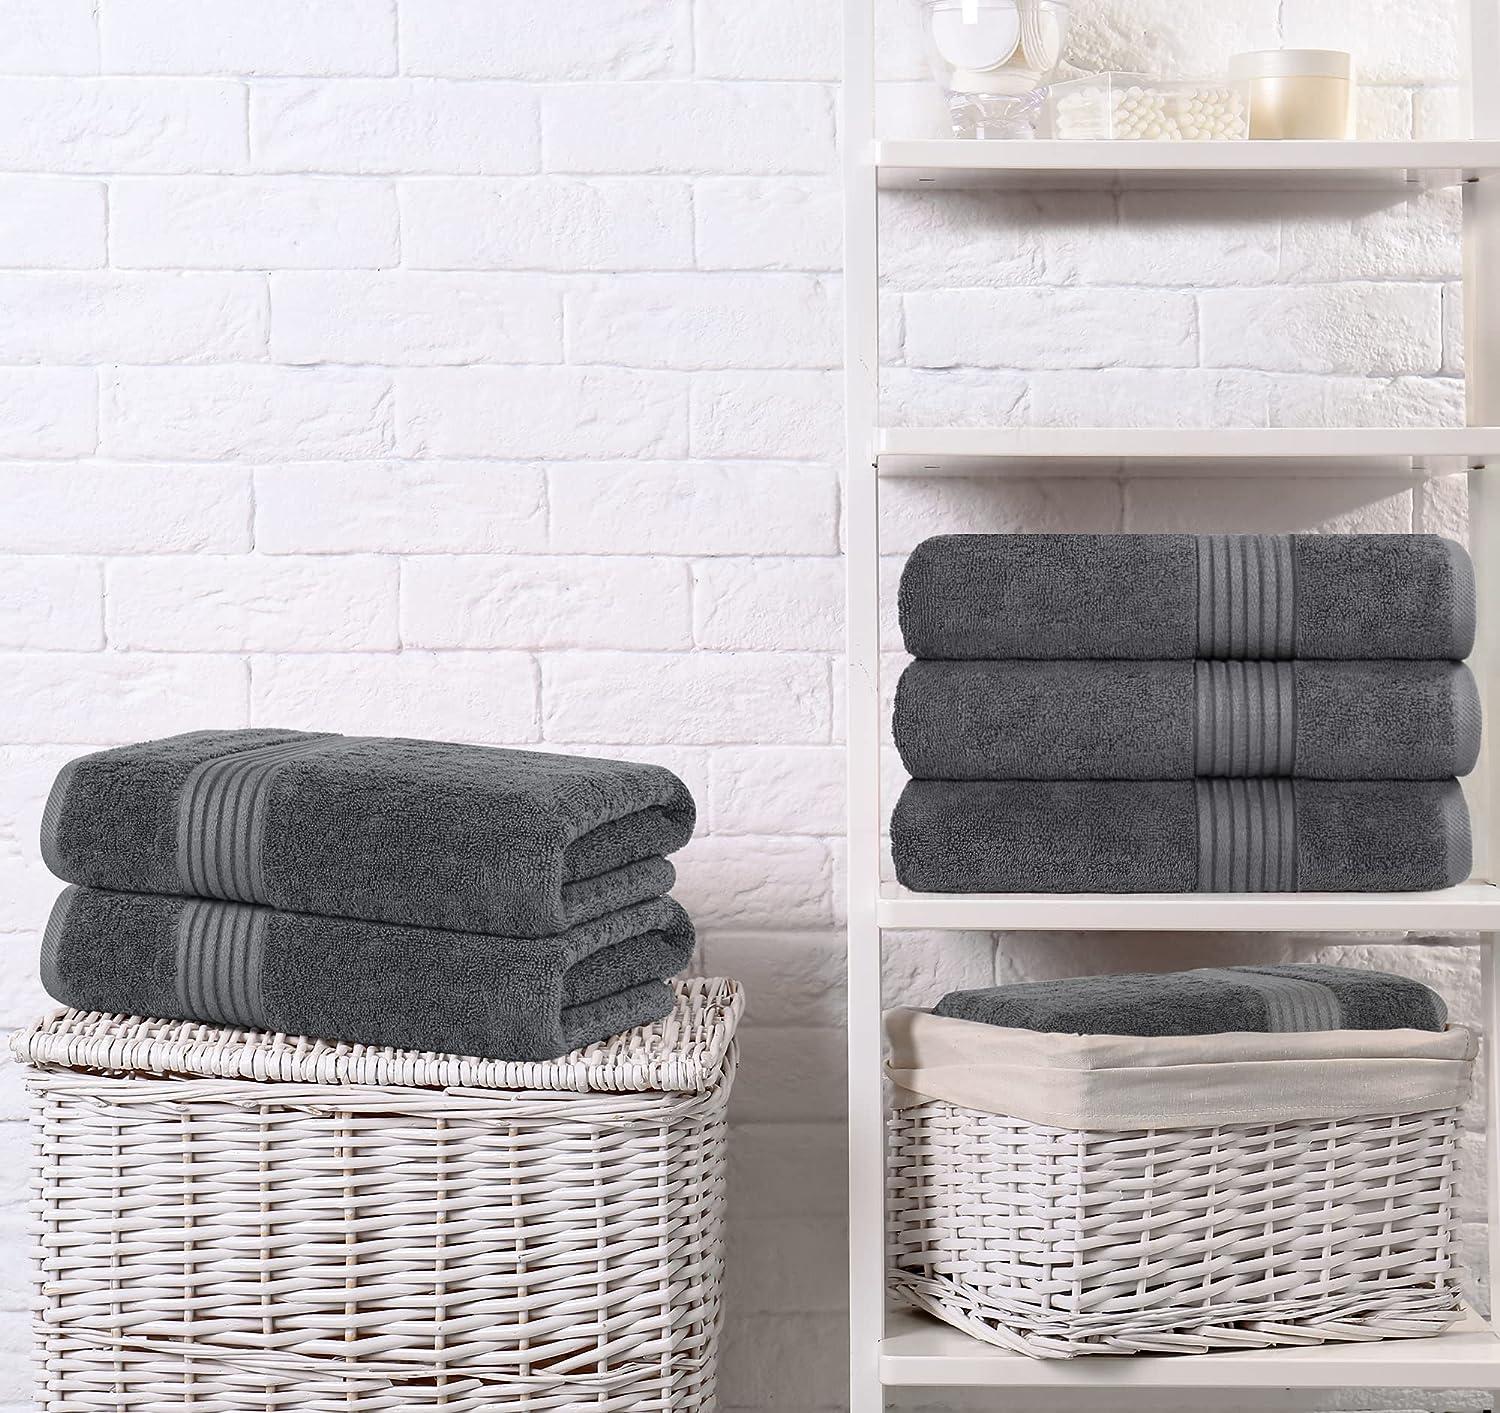  Utopia Towels 4 Pack Premium Bath Towels Set, (27 x 54 Inches)  100% Ring Spun Cotton 600GSM, Lightweight and Highly Absorbent Quick Drying  Towels, Perfect for Daily Use (Grey) : Home & Kitchen